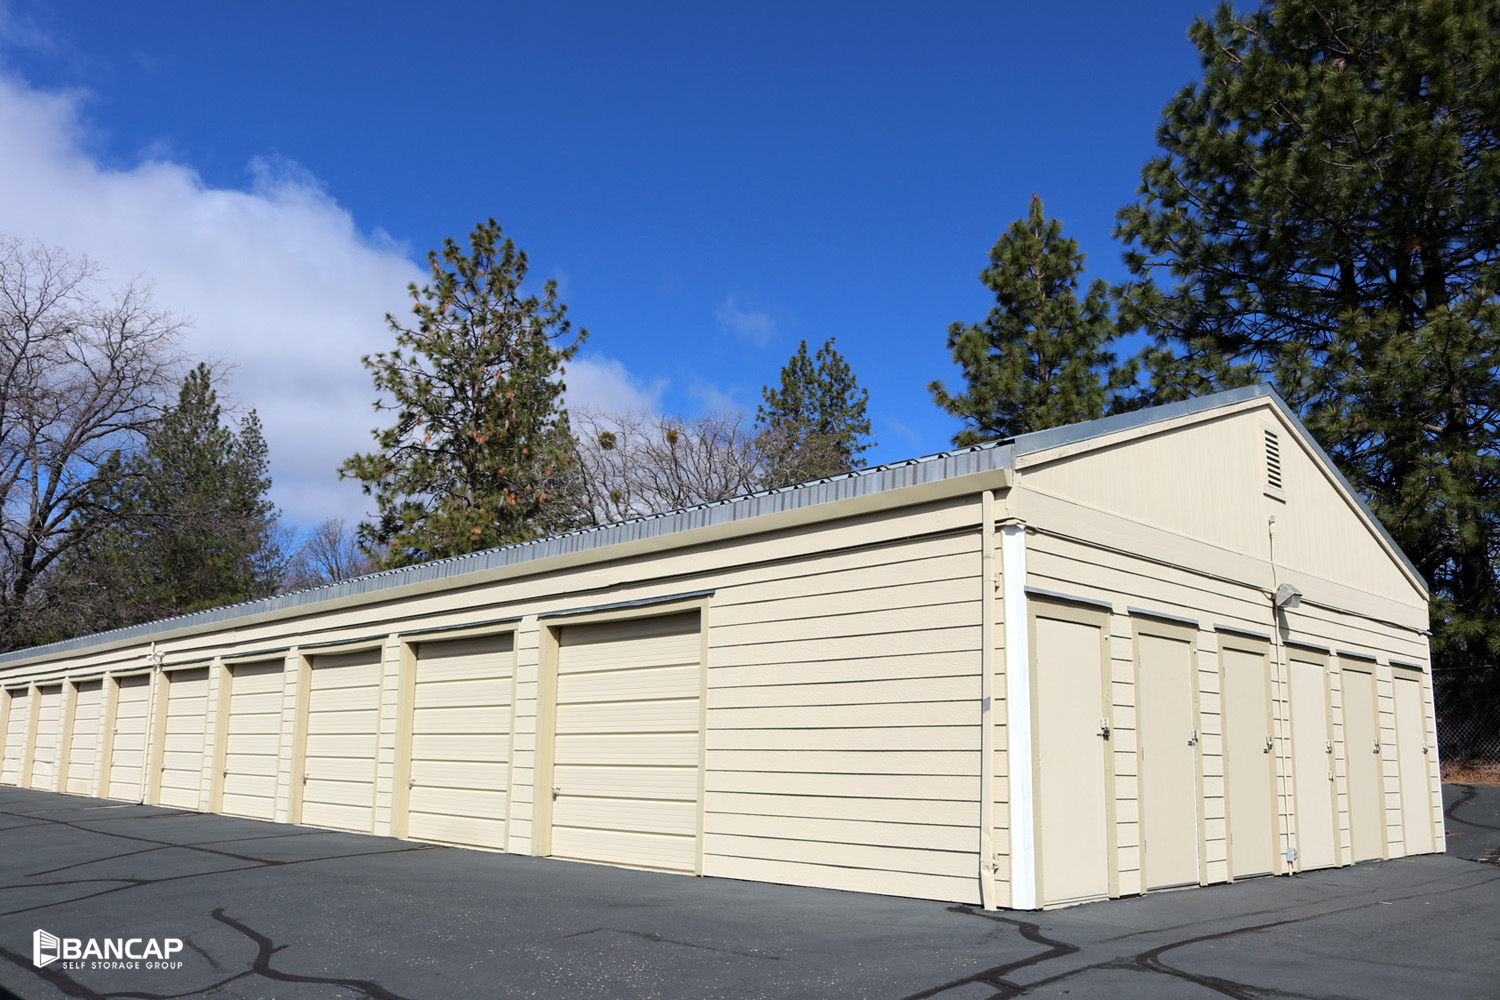 drive up self storage units grass valley, ca